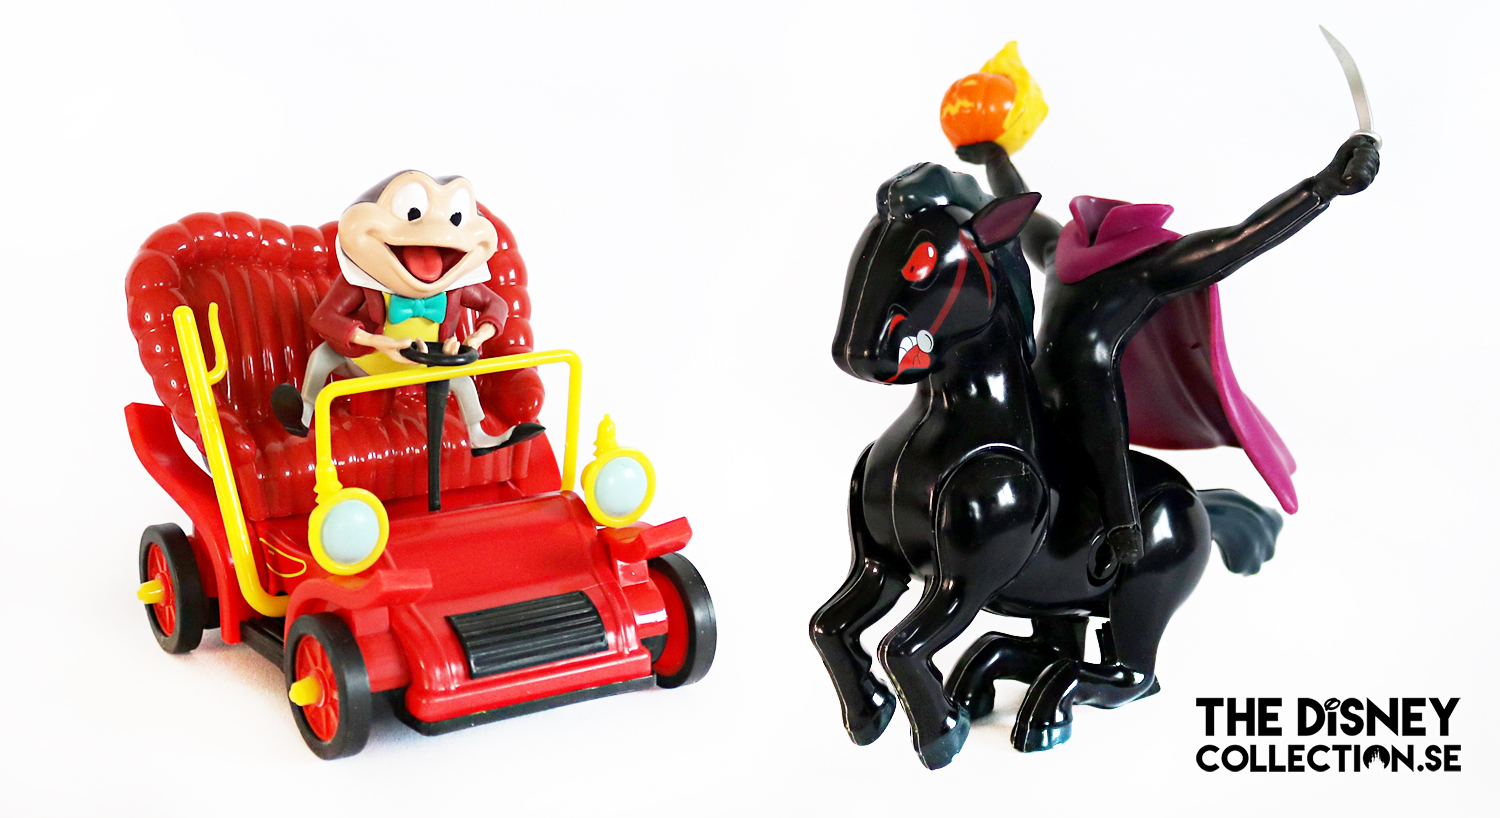 Mr. Toad and Headless Horseman Disney100 Decades Toy Set, The Adventures of Ichabod and Mr. Toad-ShopDisney